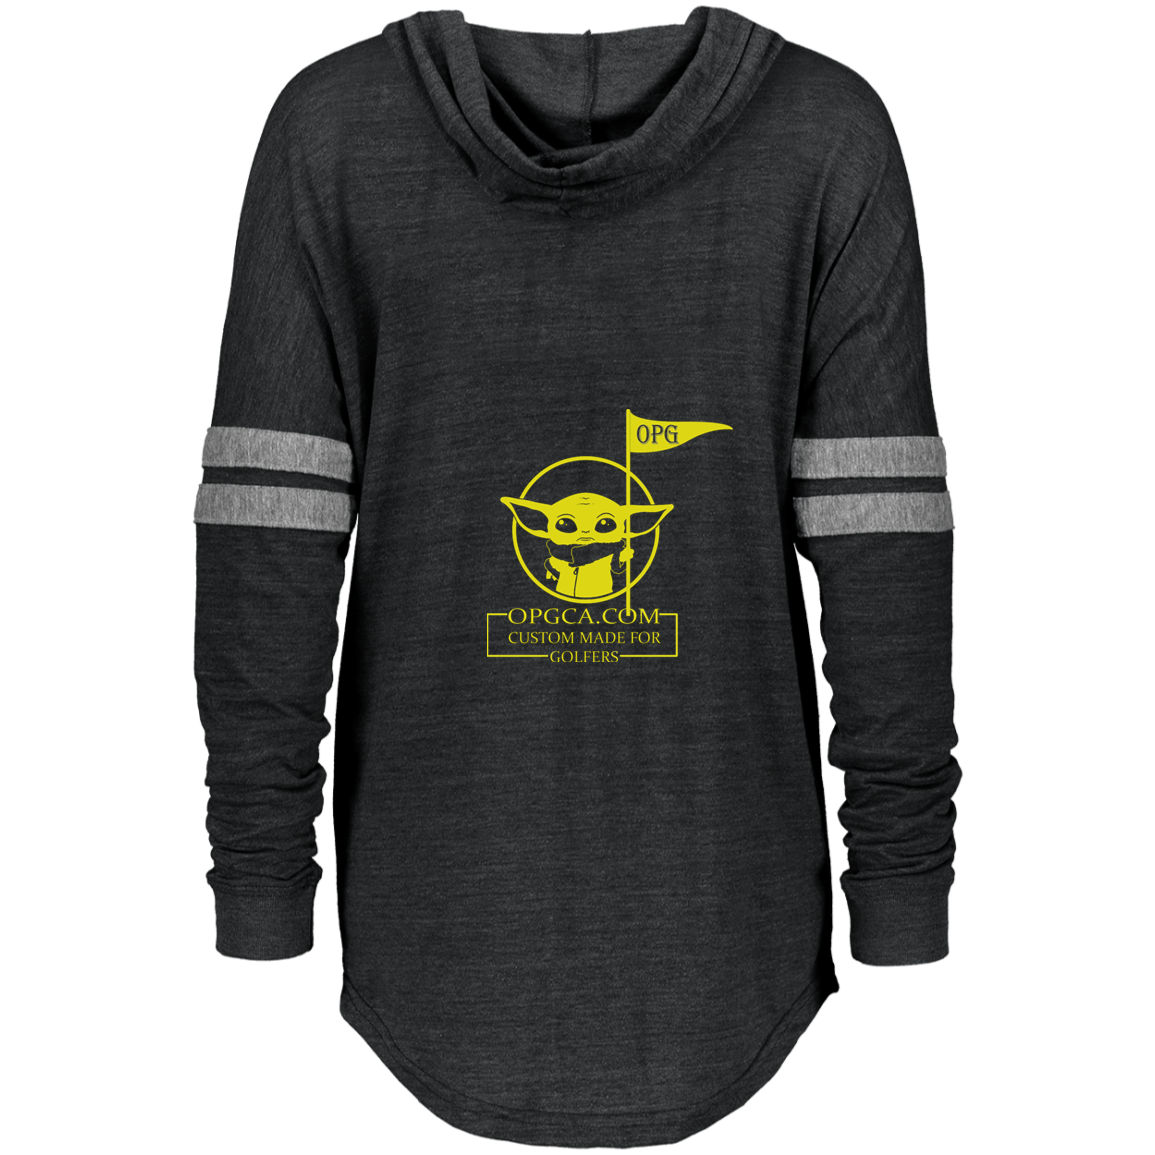 OPG Custom Design #21. May the course be with you. Star Wars Parody and Fan Art. Ladies Hooded Low Key Pullover